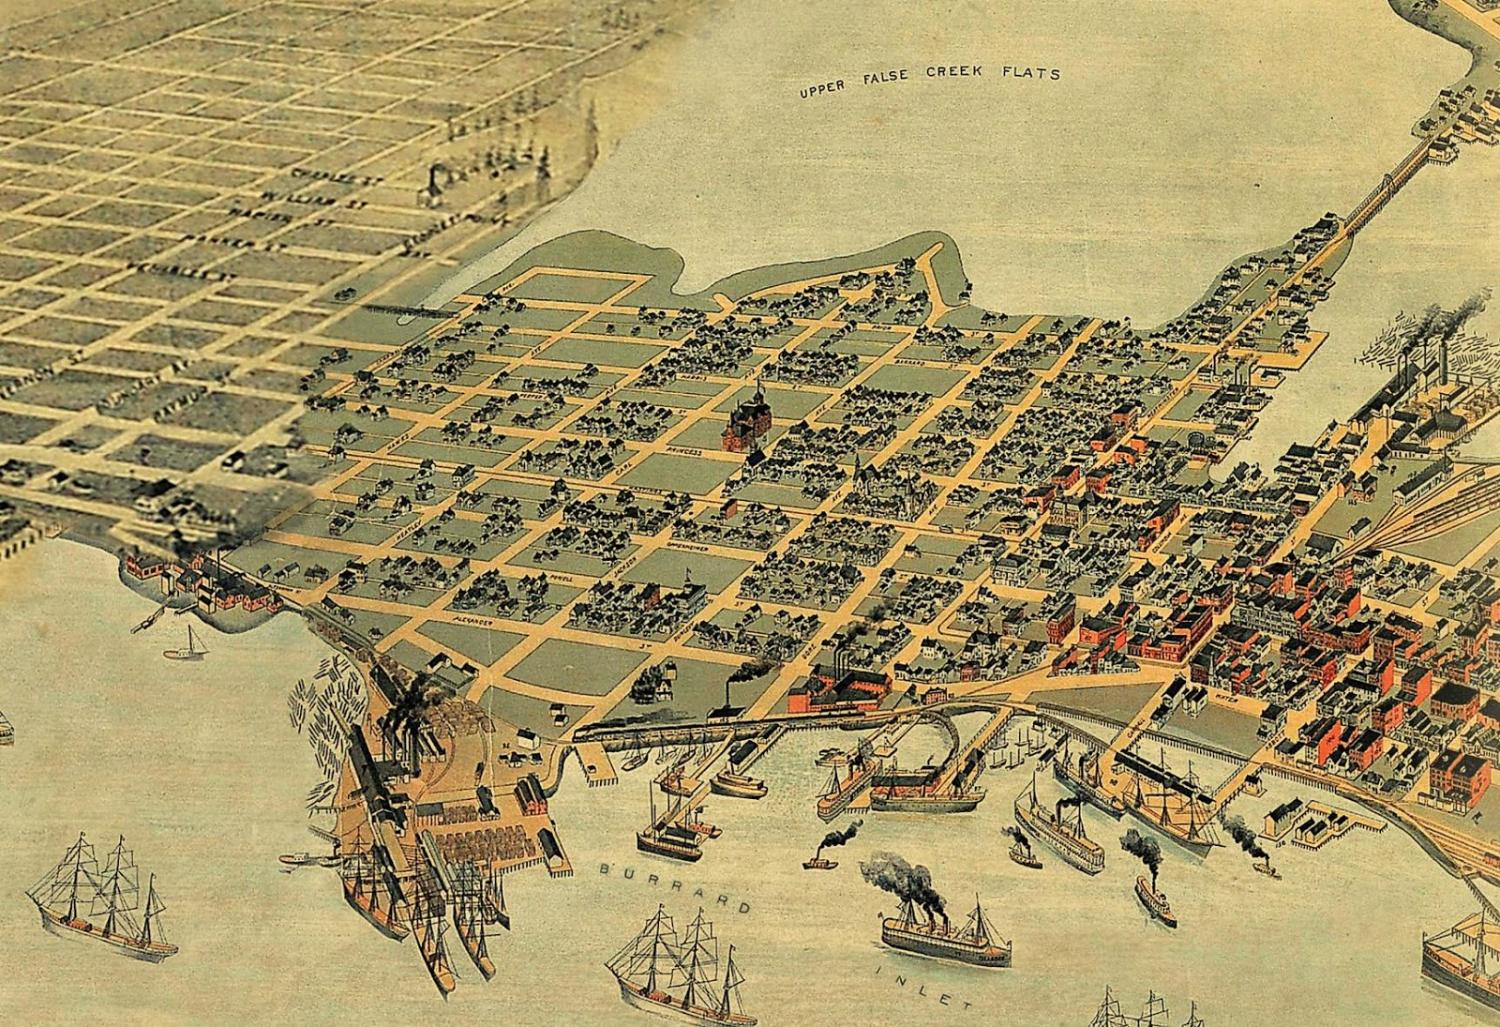 Section of bird's-eye view map of Vancouver in 1898; it focuses on the area near Hastings Mill.